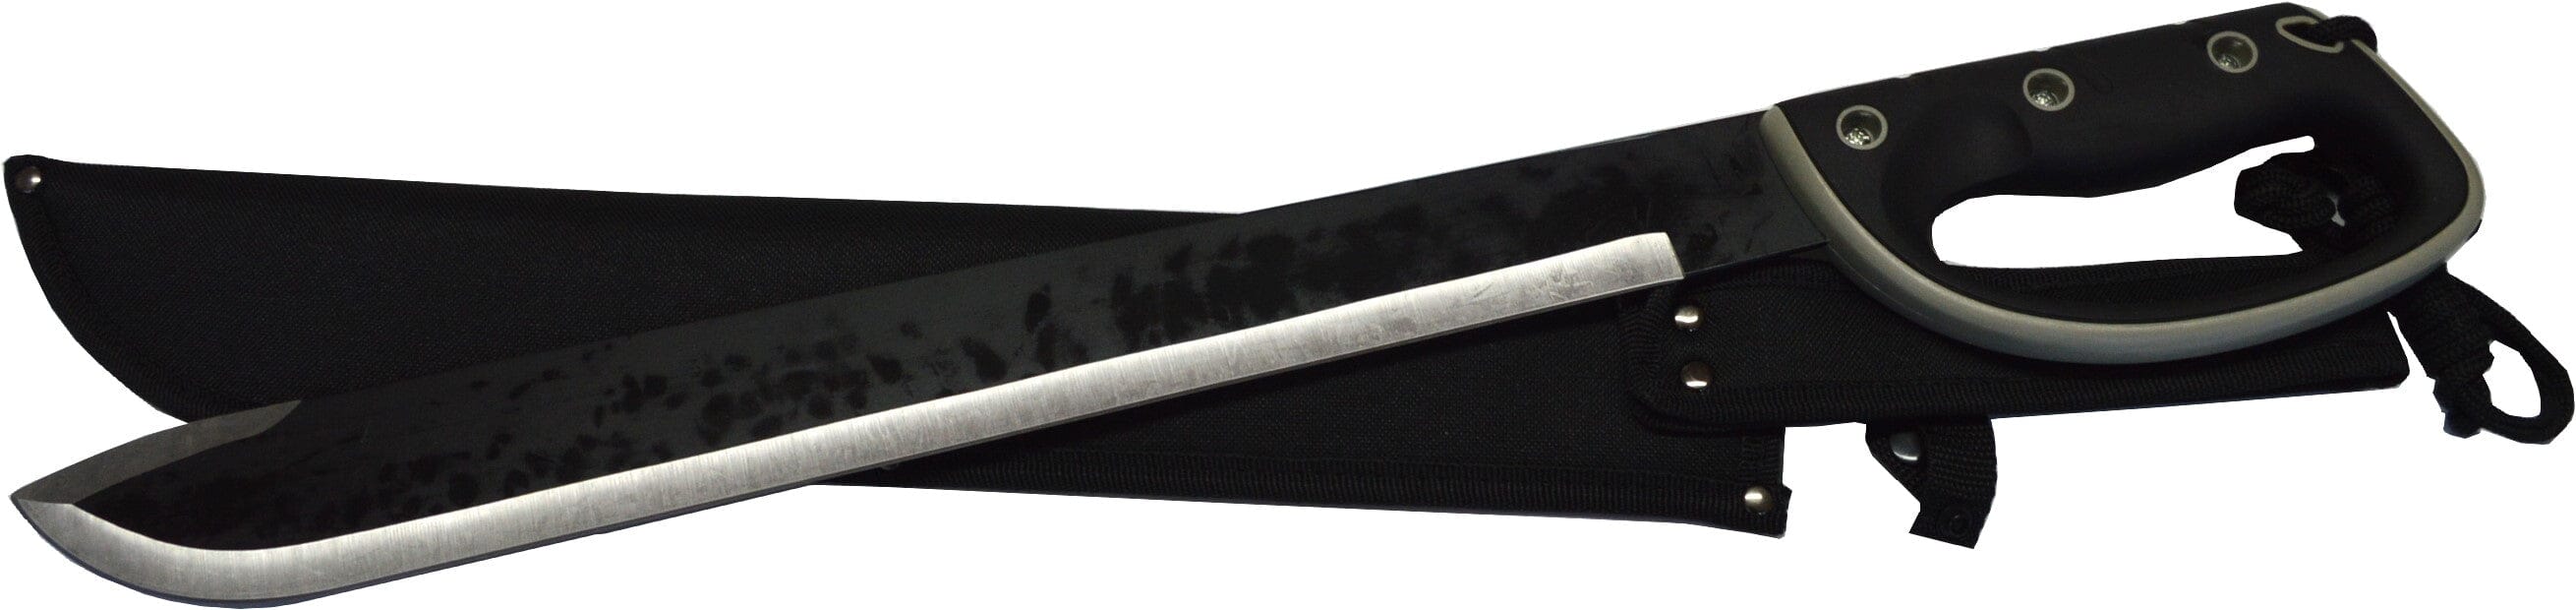 Xcel Machette with Stainless Blade & Soft Rubber Handle 400mm